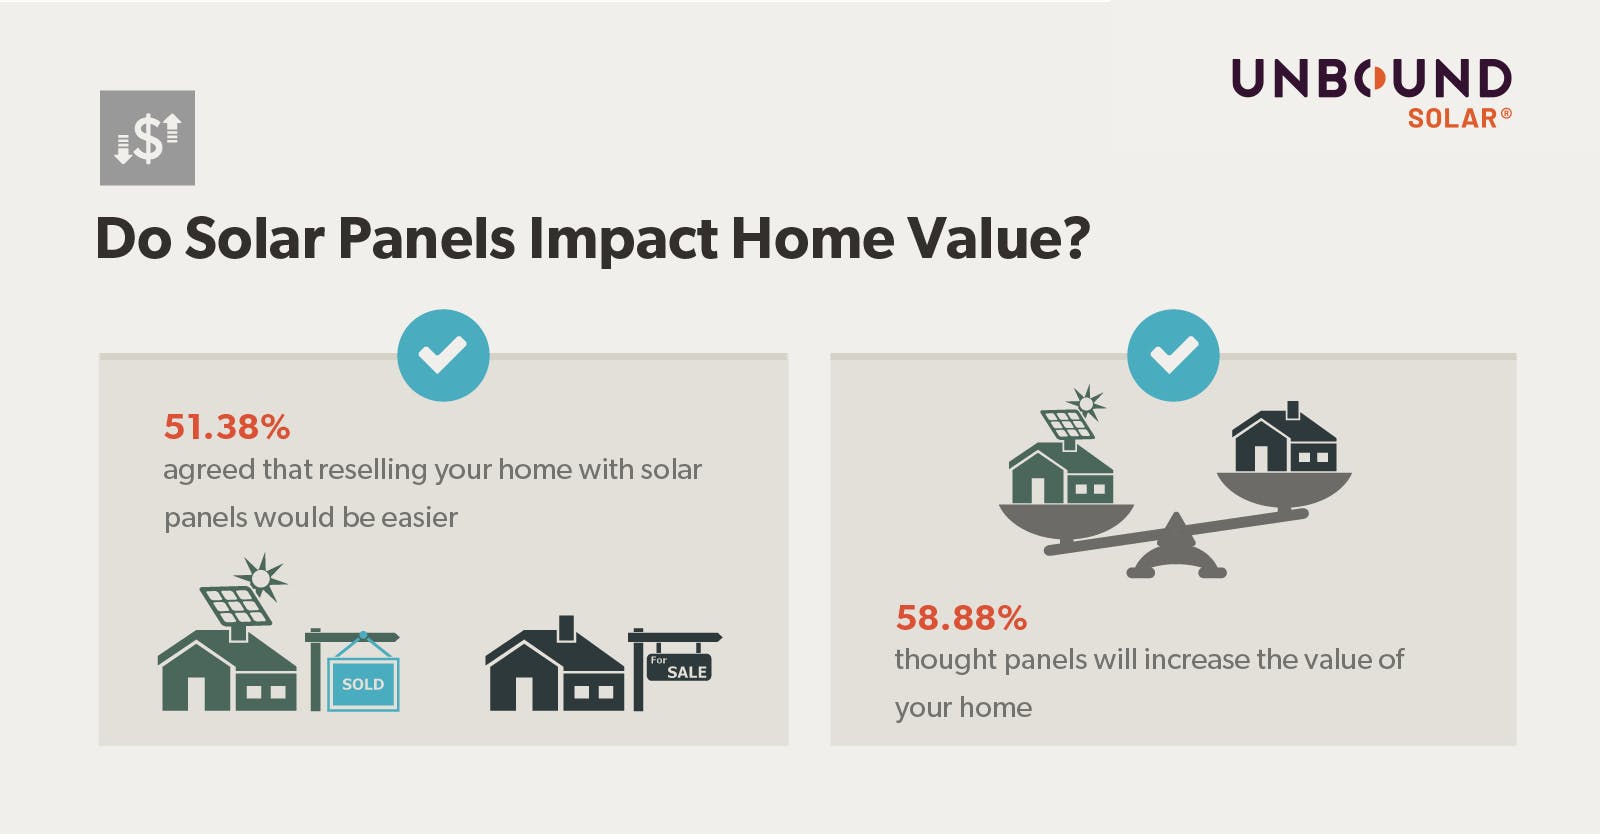 Image showing how people perceive solar panels affecting their home value with 51.38% thinking having panels will make reselling your home easier, and 58.88% thinking they increase home value.